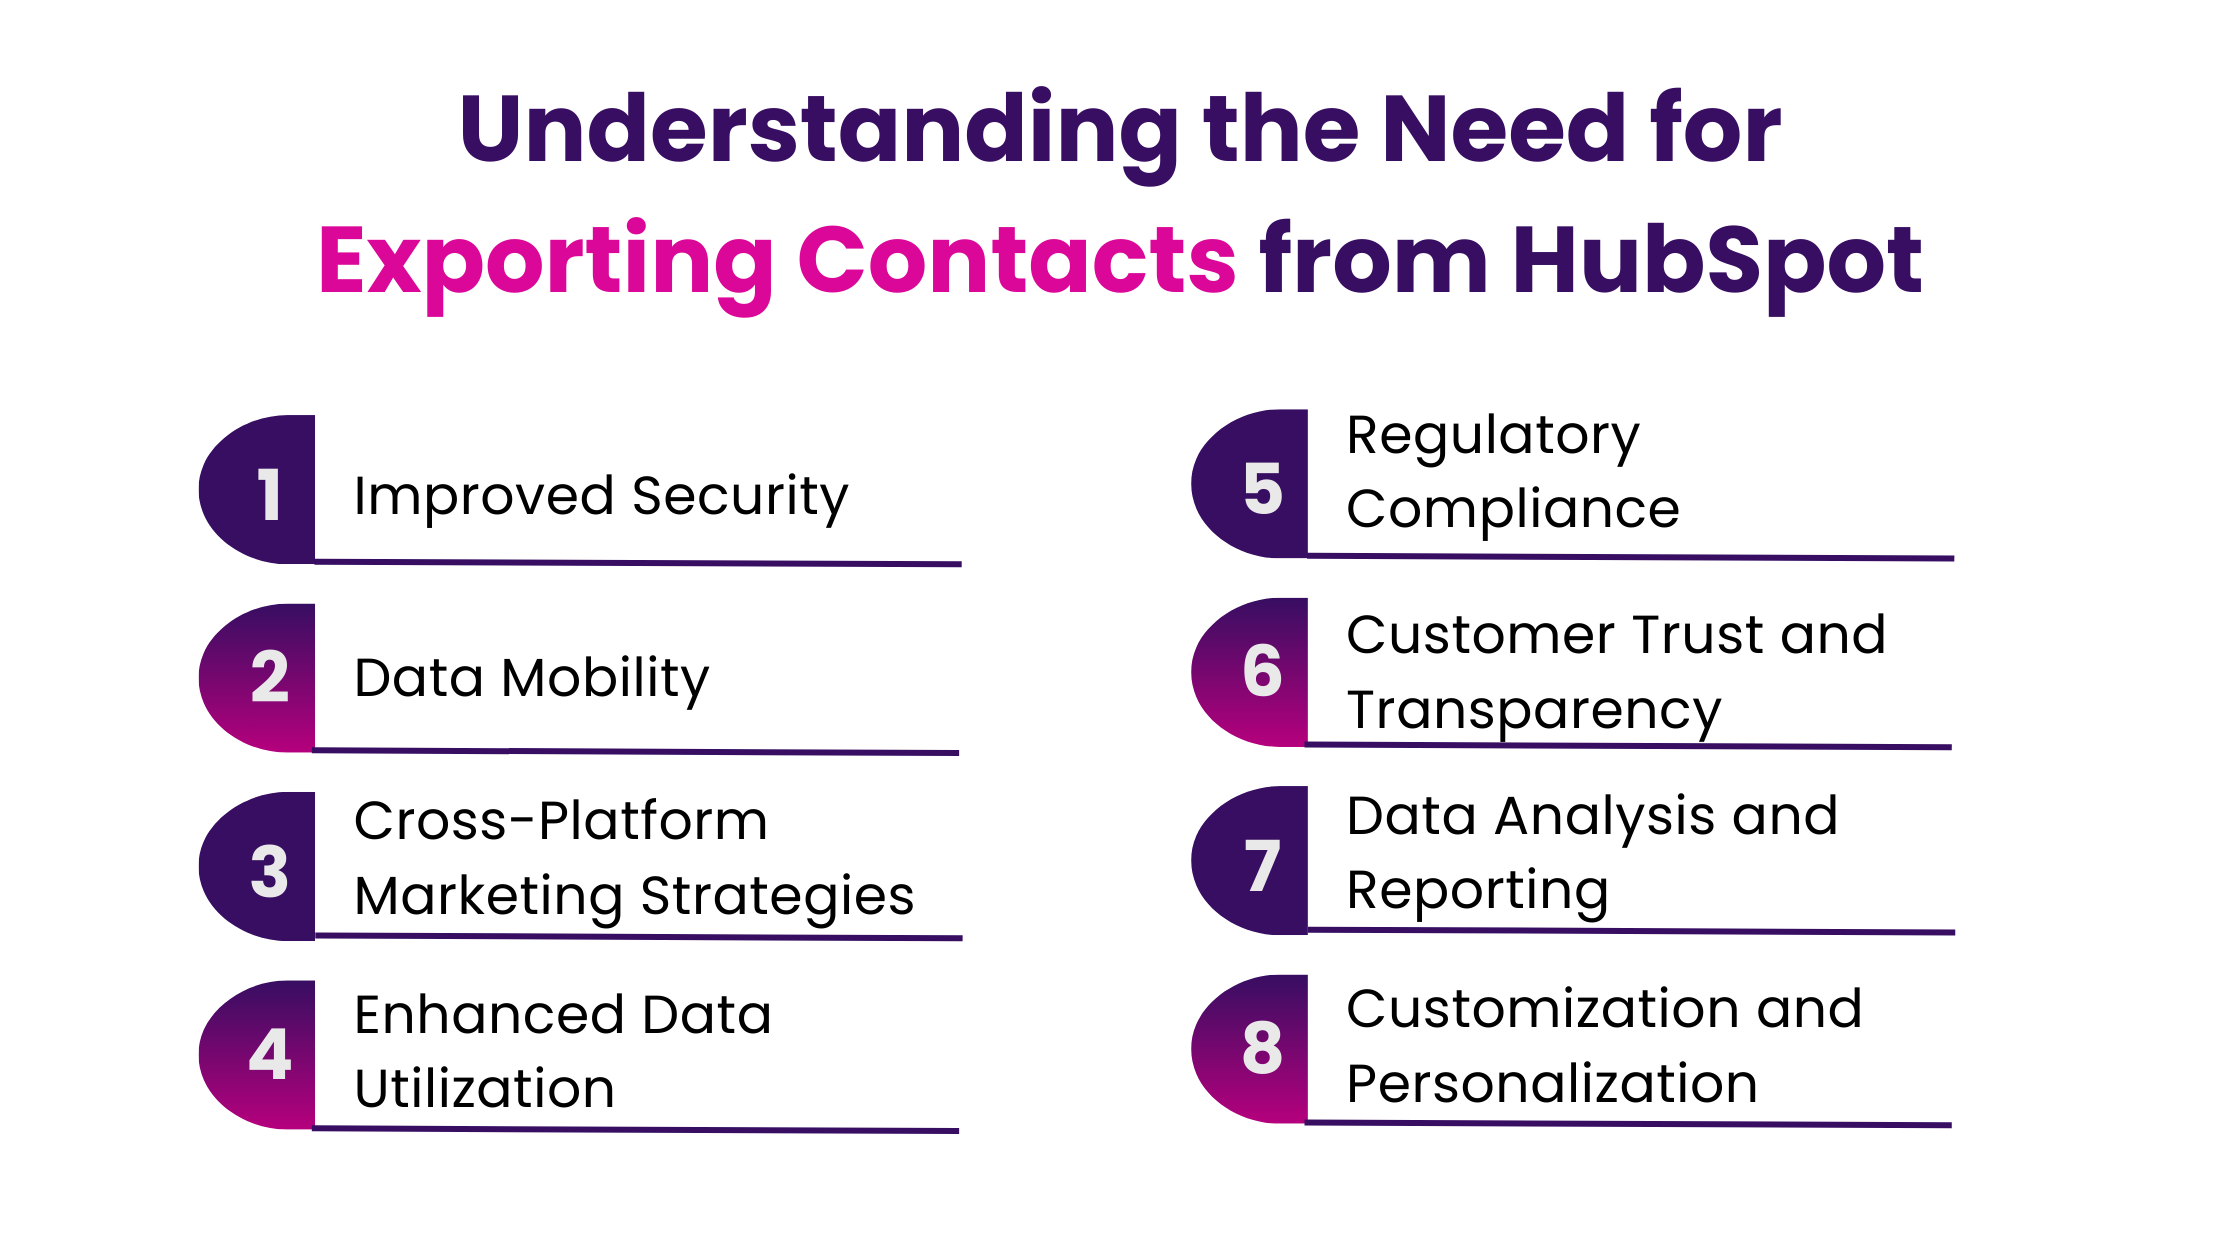 Understanding the Need for Exporting Contacts from HubSpot